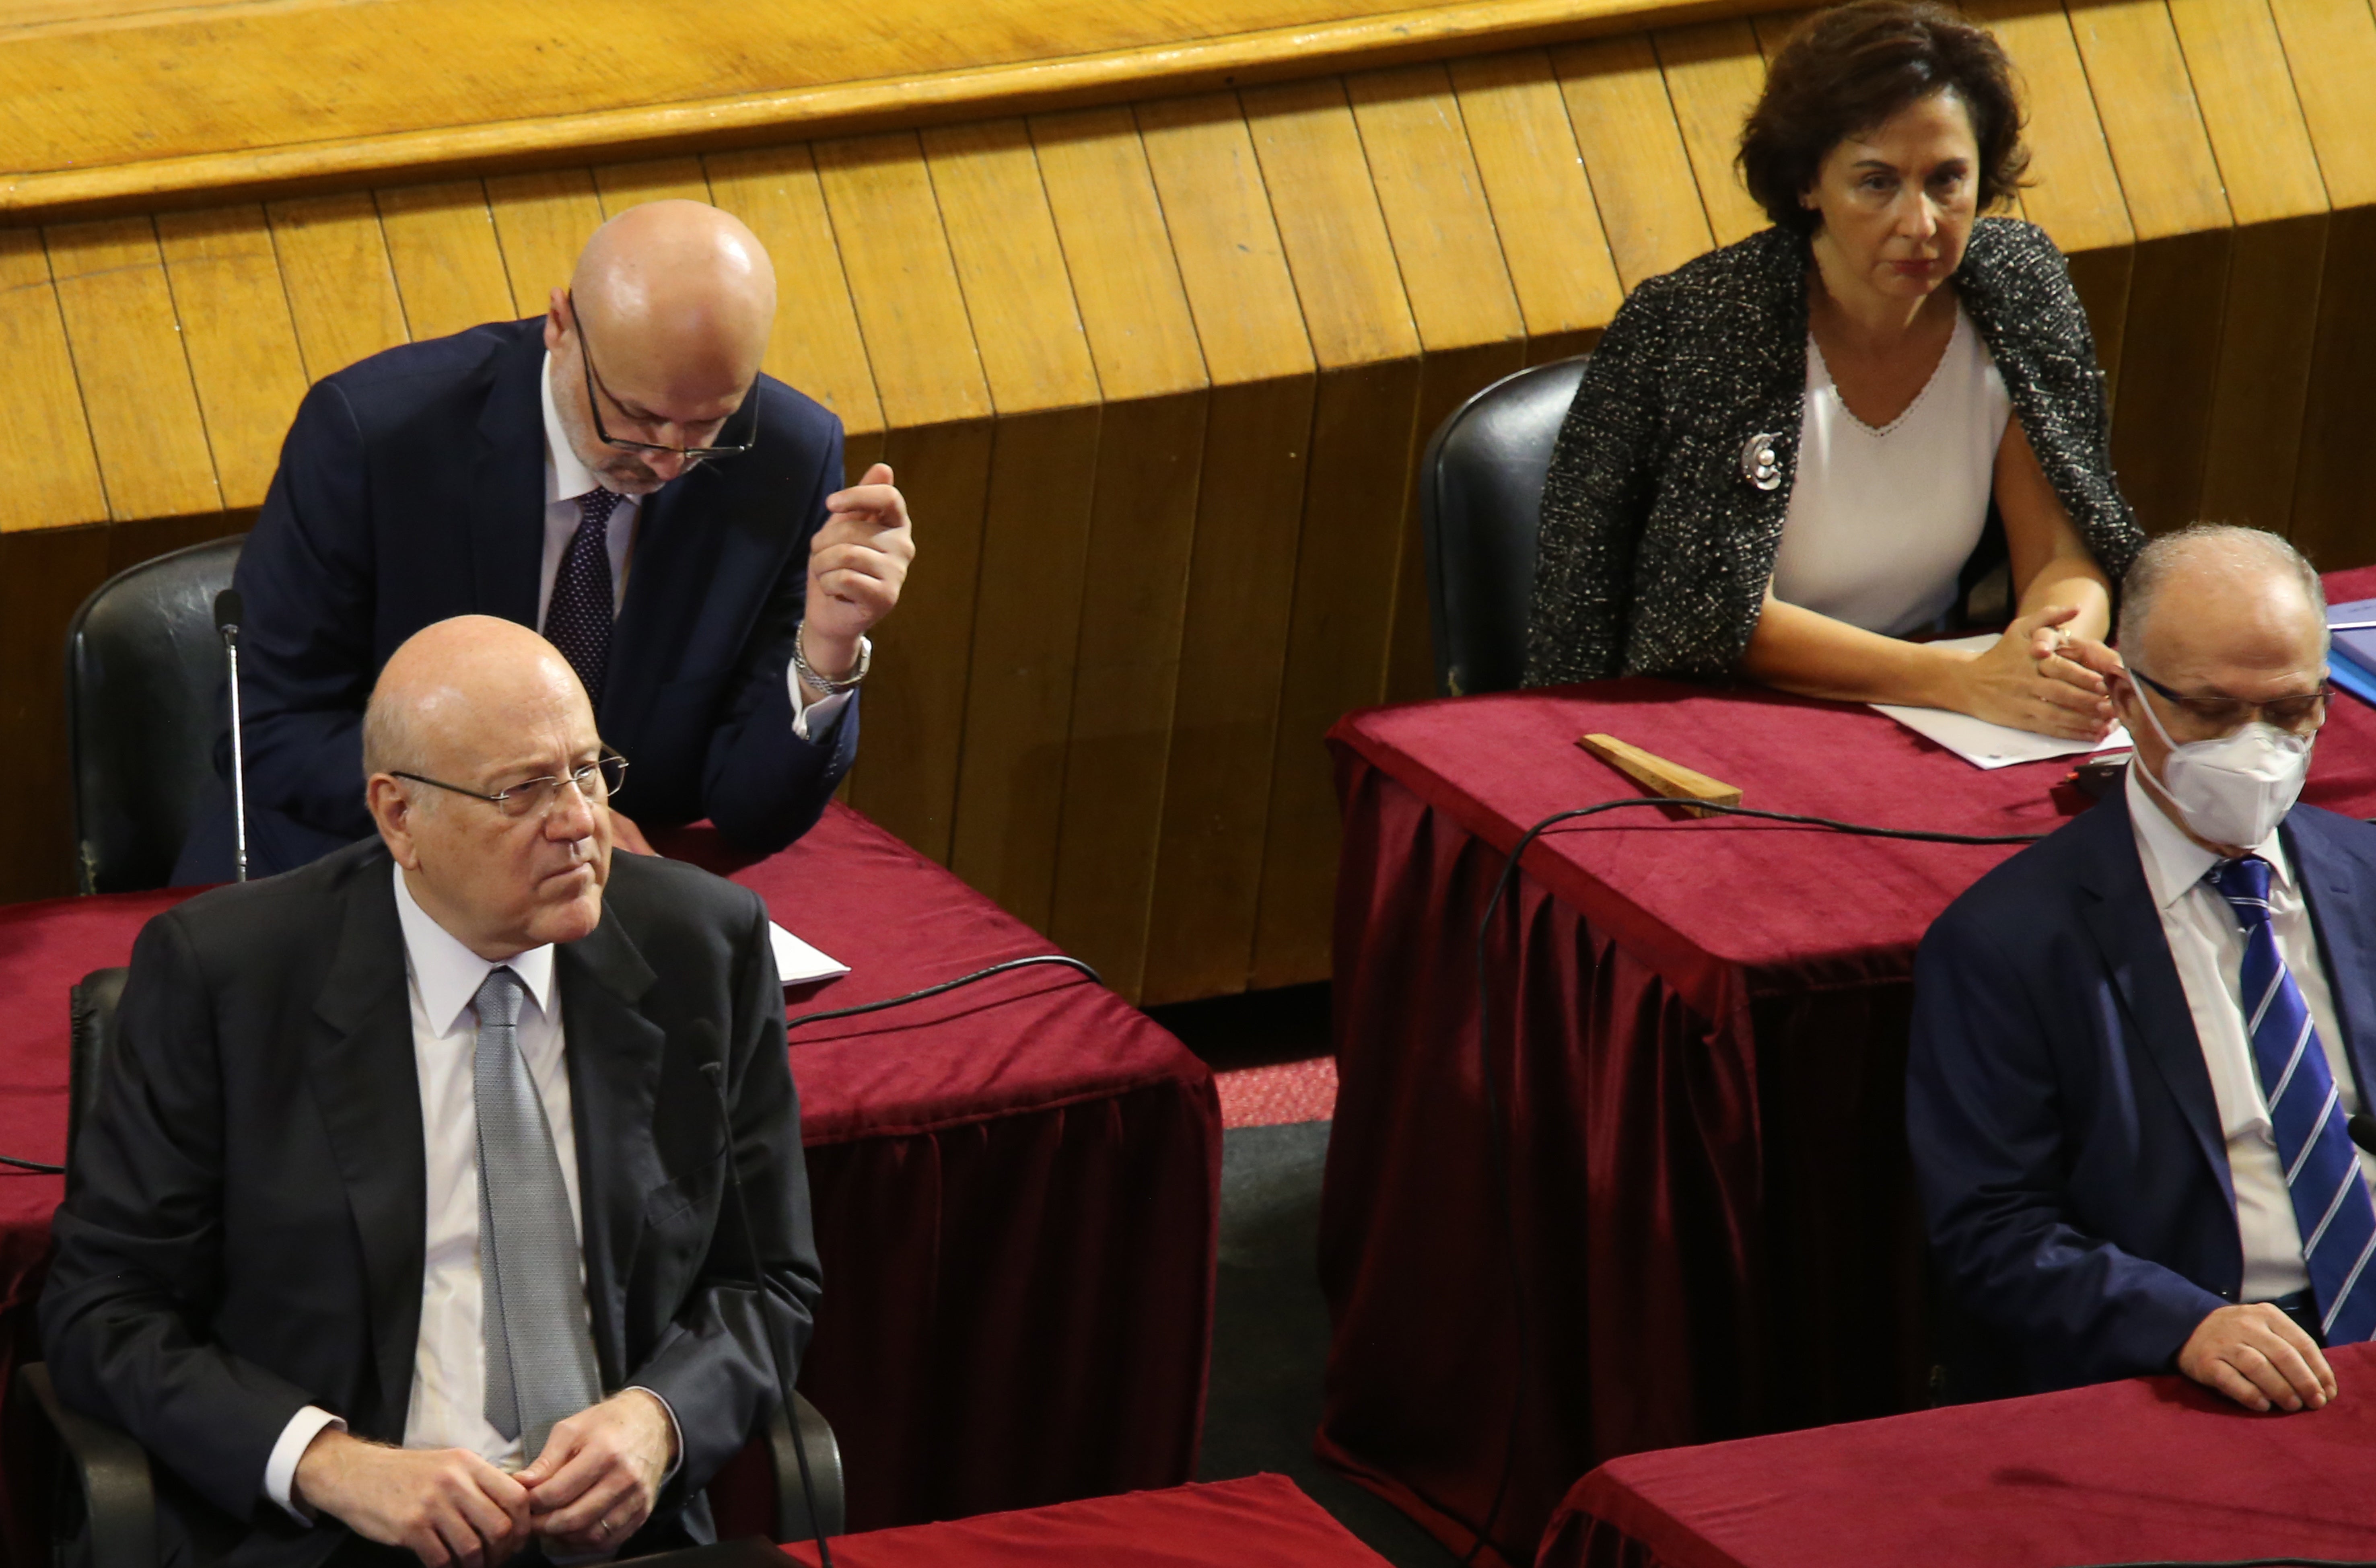 Najib Mikati (left) speaks at the Unesco Palace in Beirut on 20 September. The session, to approve the new cabinet, was interrupted by a power outage